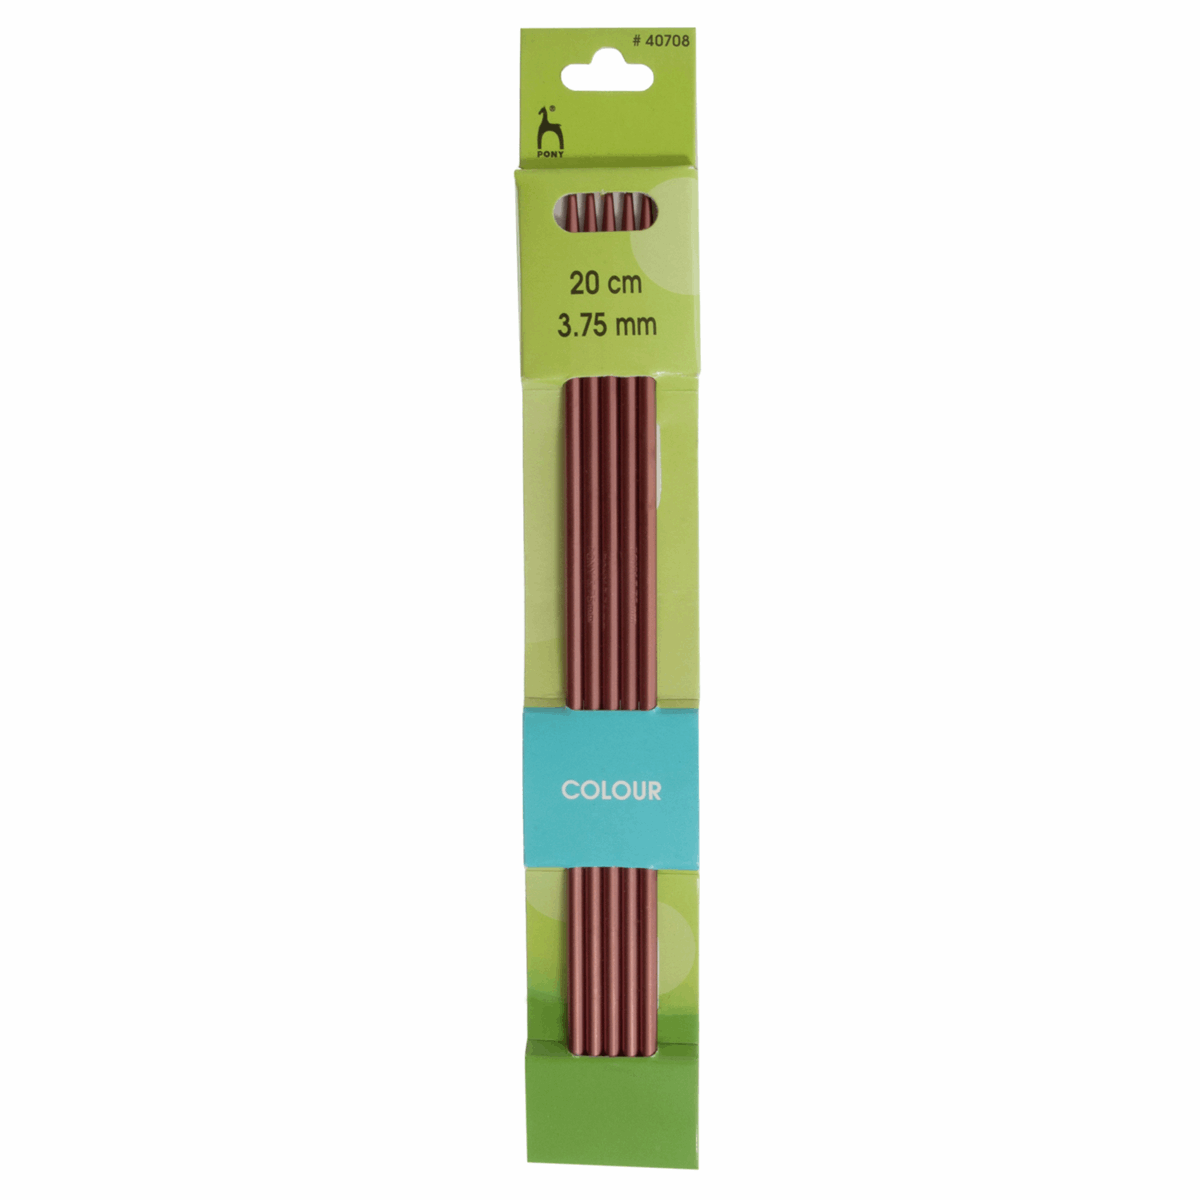 PONY Double-Ended Coloured Knitting Pins - 20cm x 3.75mm (Set of 5)